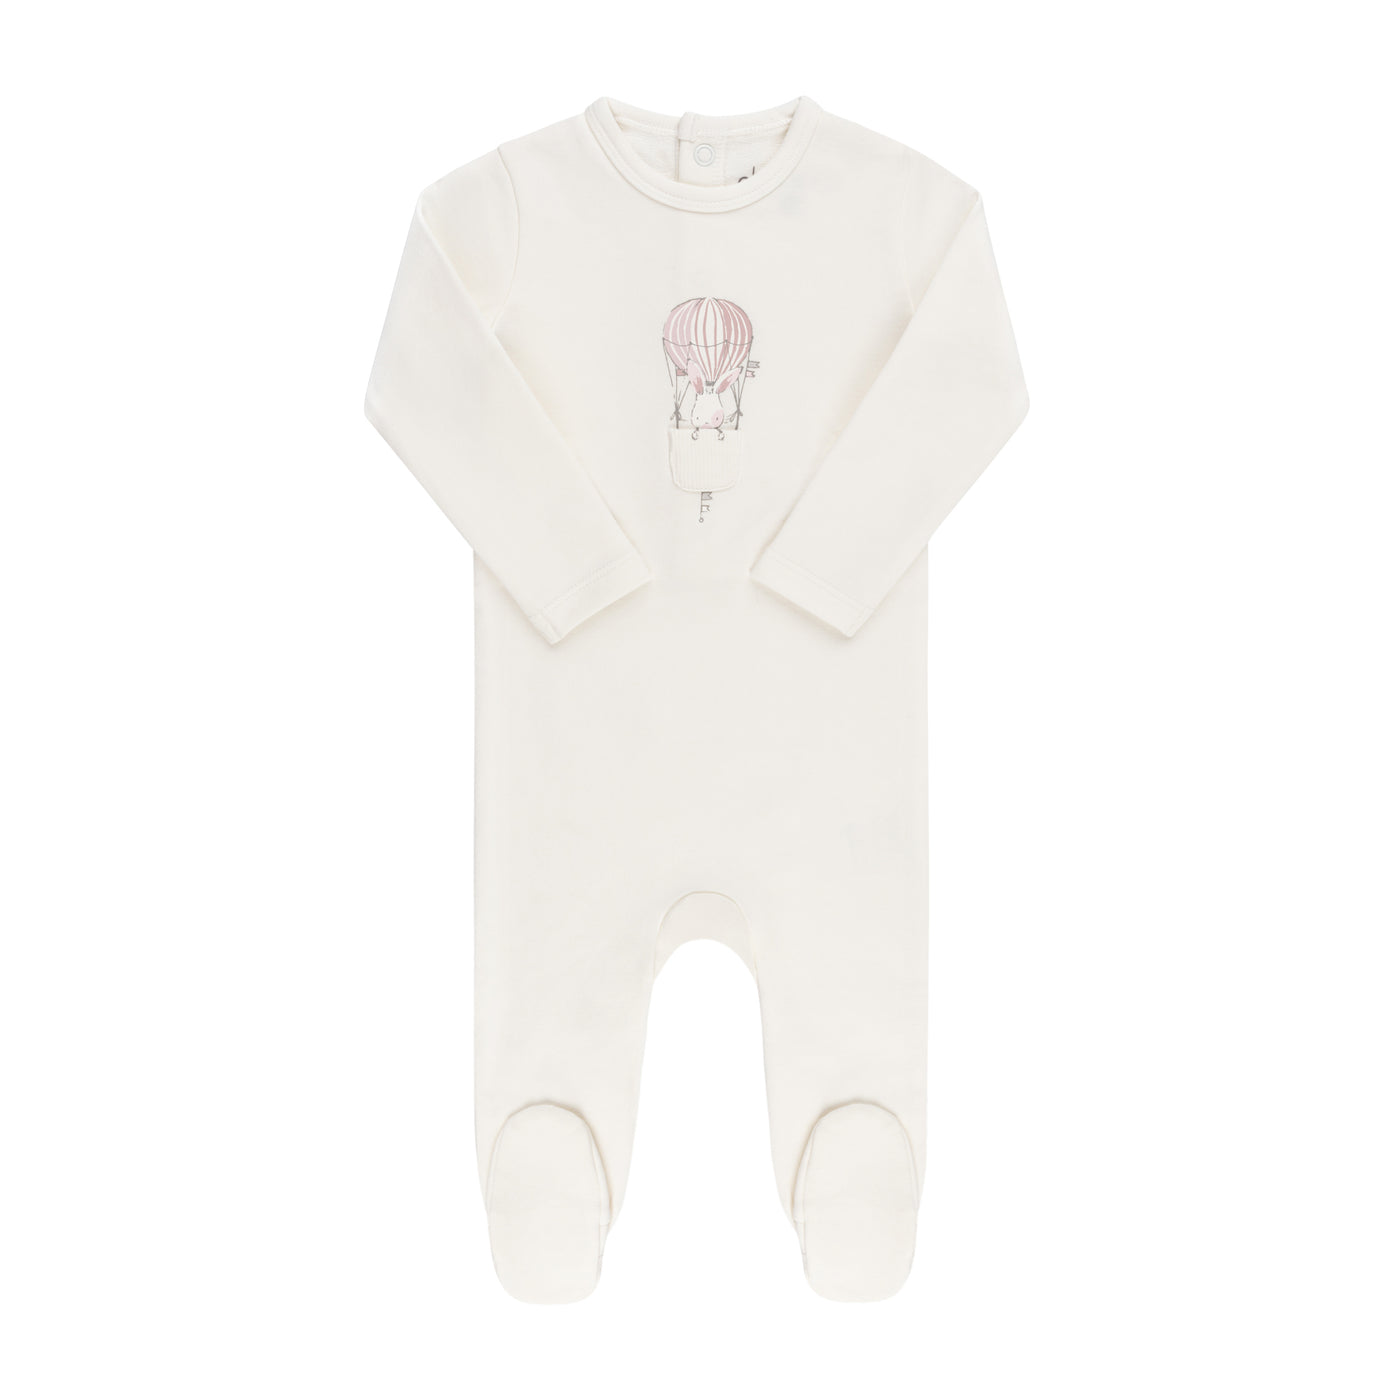 Ely's & Co. Hot Air Balloon Collection Ivory/Pink Footie